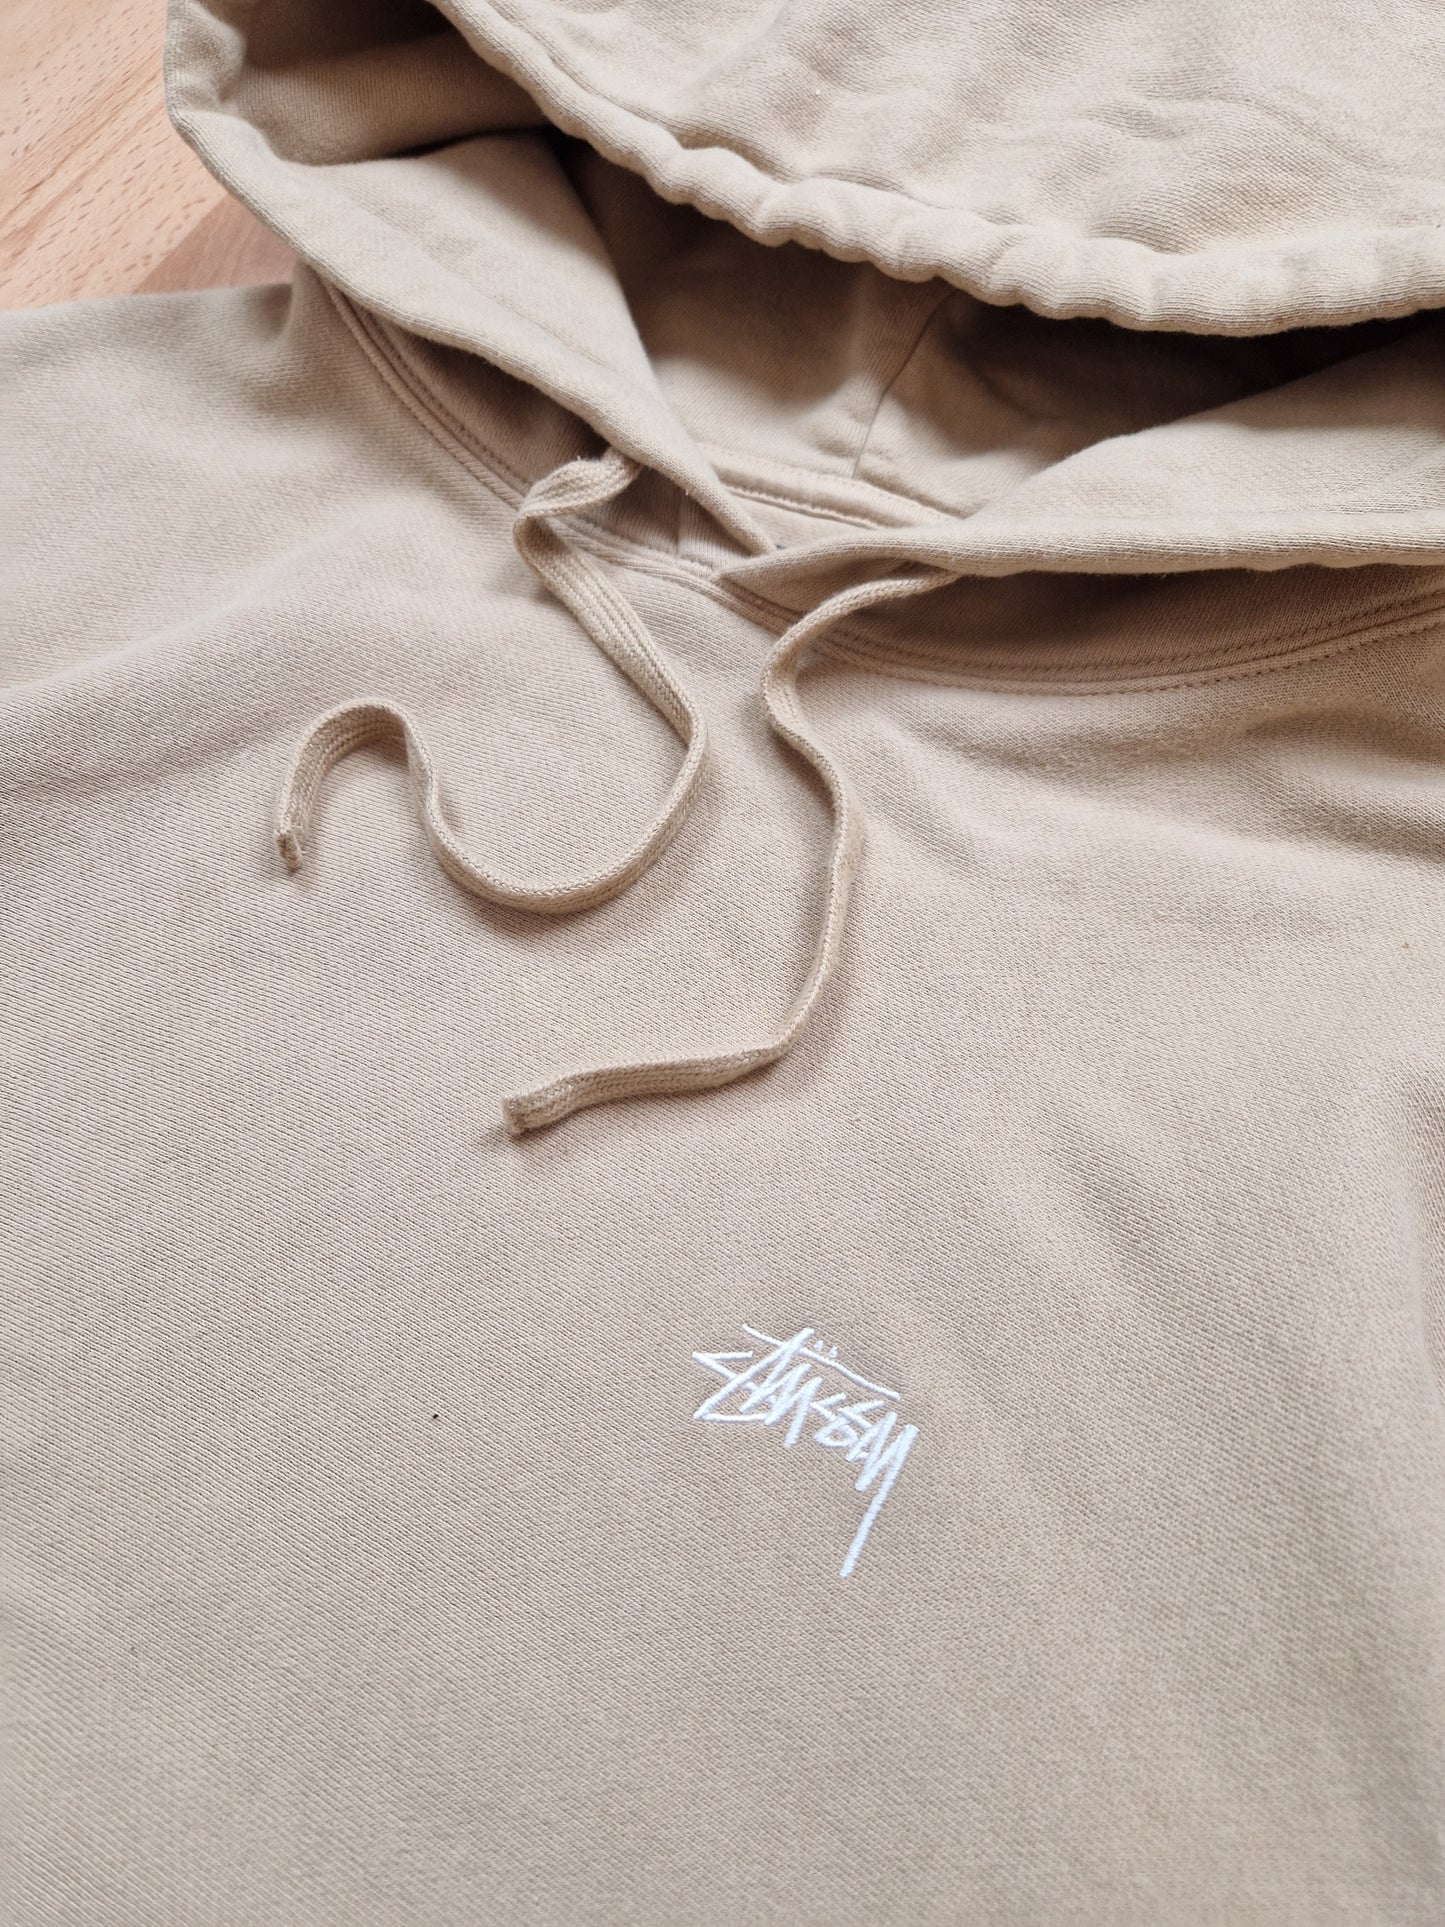 Stussy Embroidered Stock Logo Hoodie (M/L)